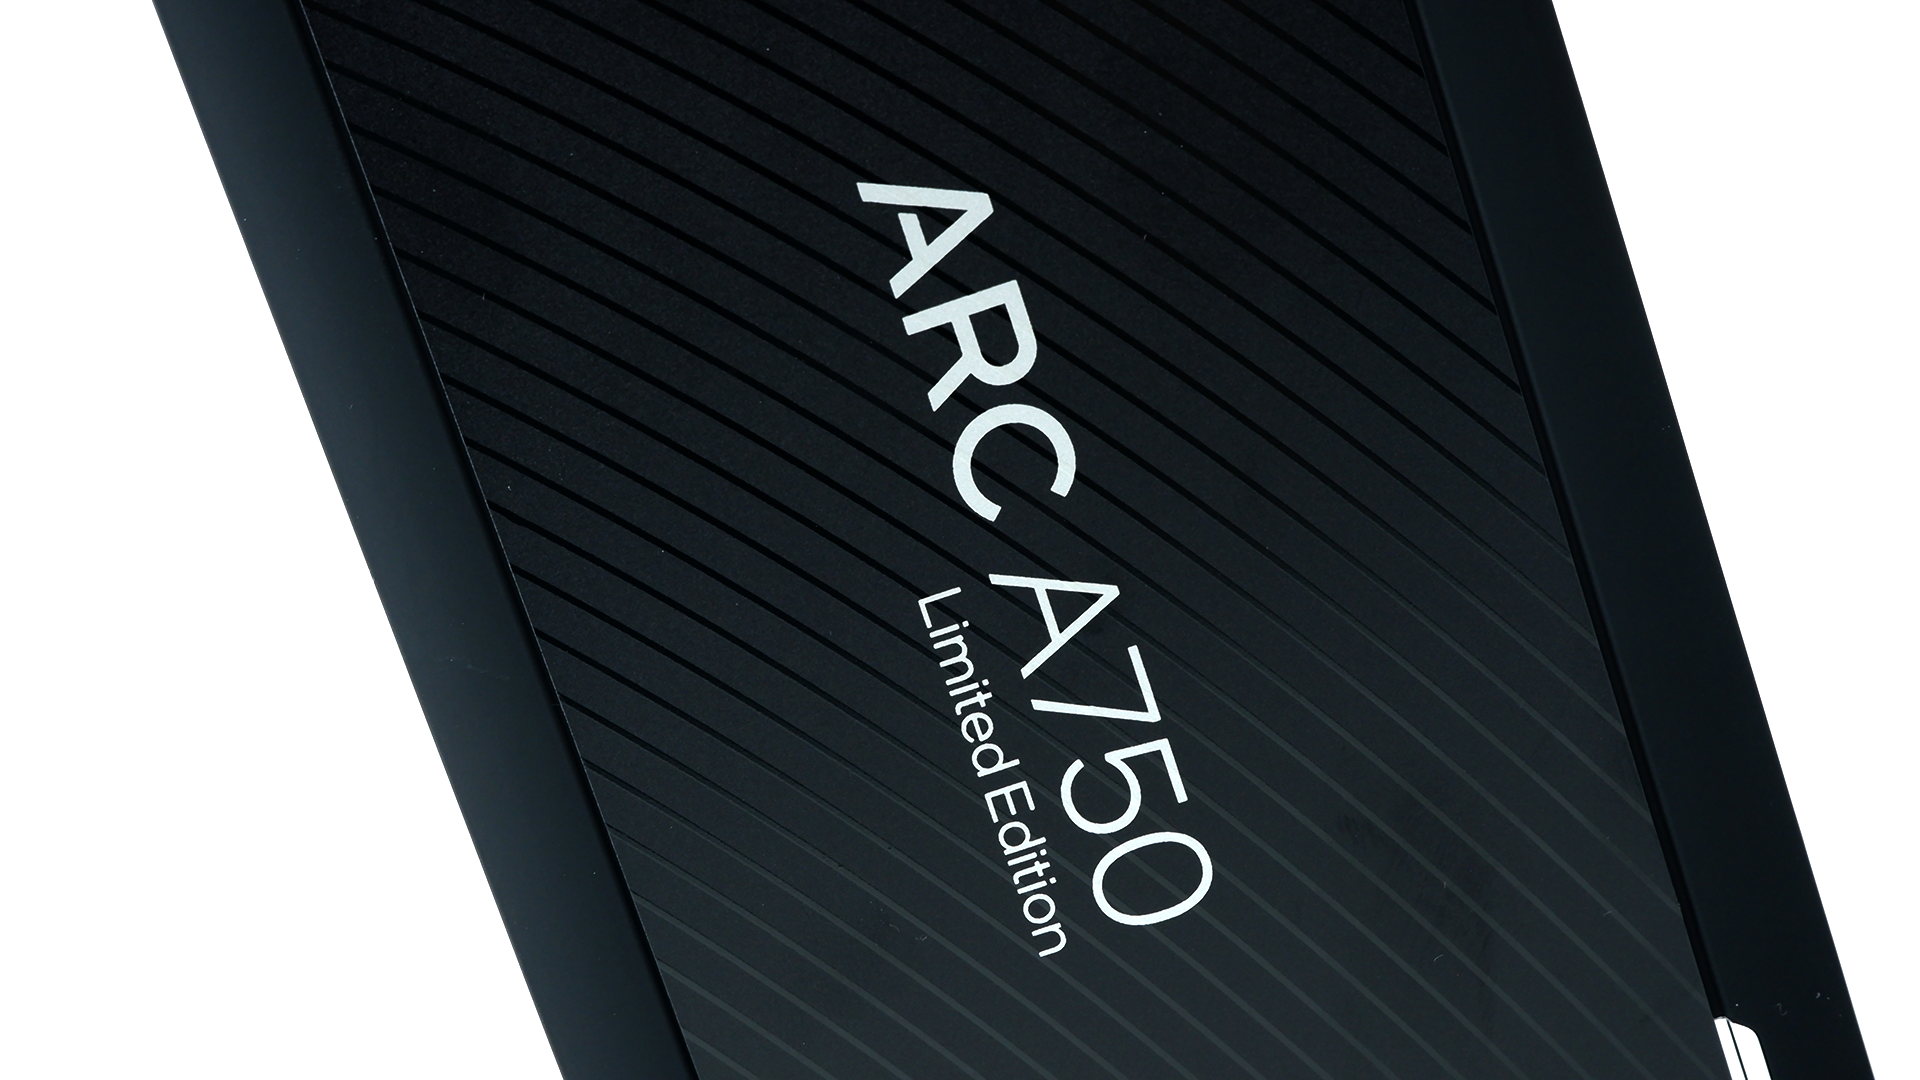 Intel Arc A750 Limited Edition graphics card